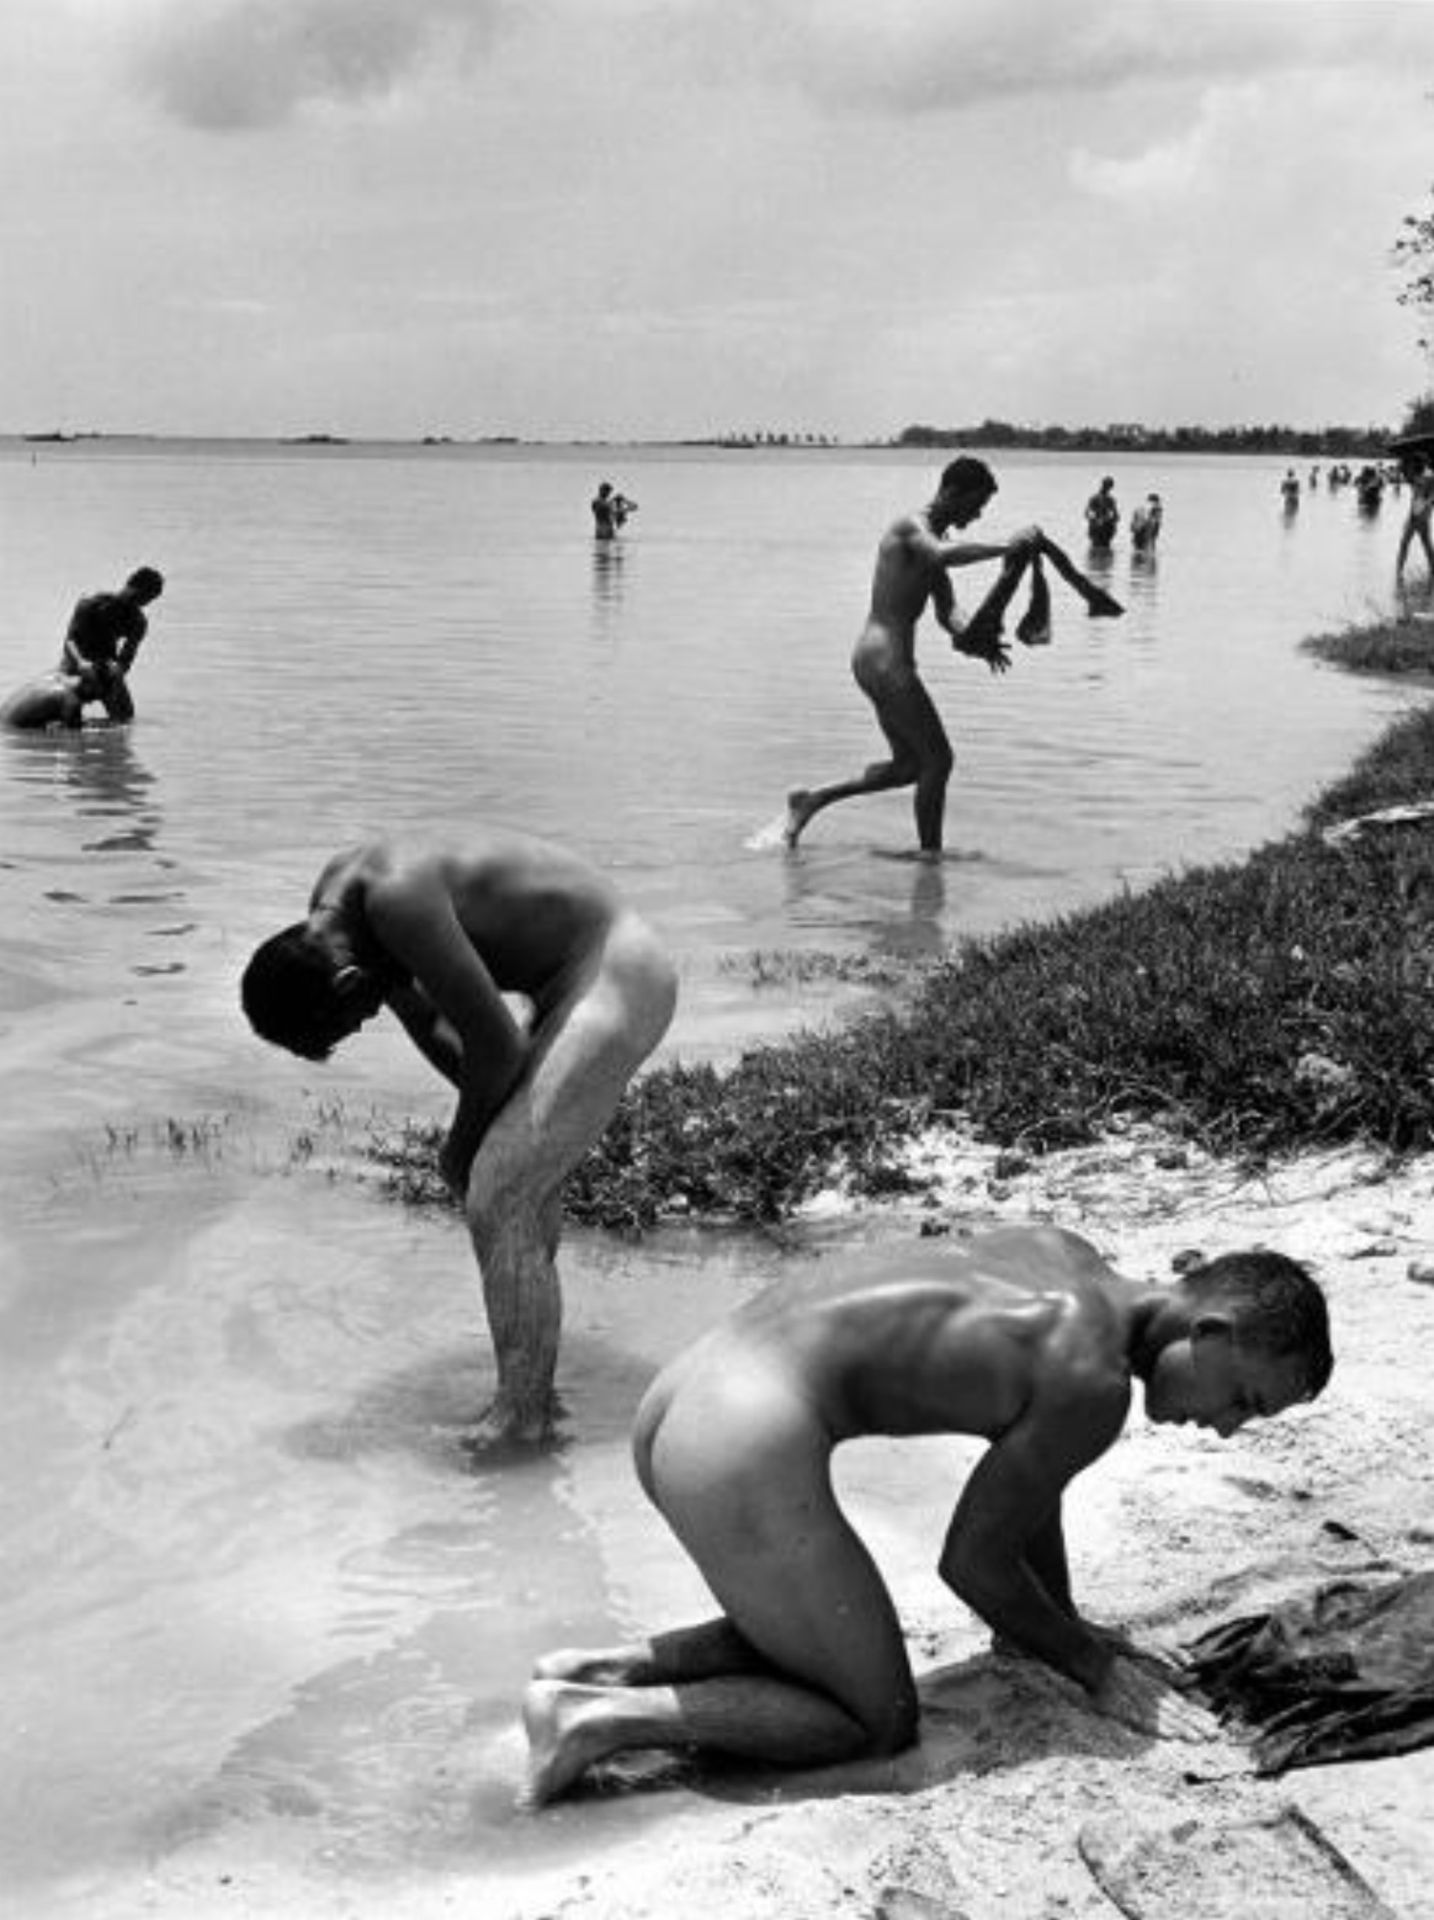 Peter Stackpole "Naked US Soldiers, Saipan" Photo Print